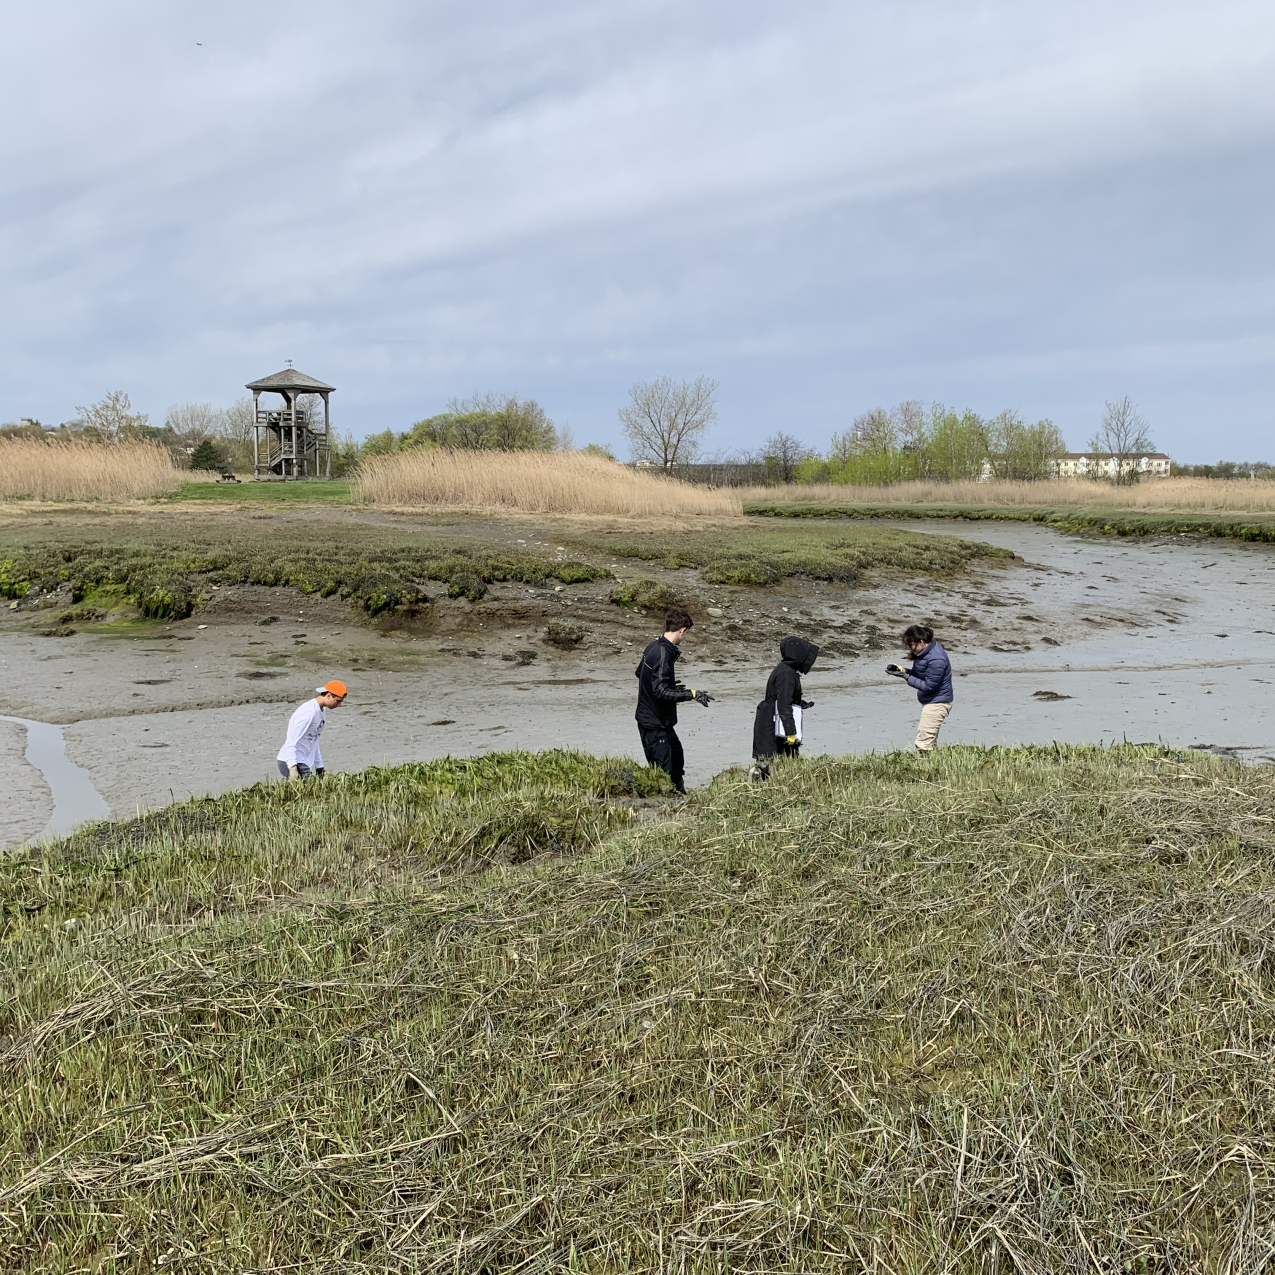 Four people are walking outside in a muddy channel in a salt marsh. In the background, there are a few buildings to the right and a wooden structure sitting on a grassy area to the left.